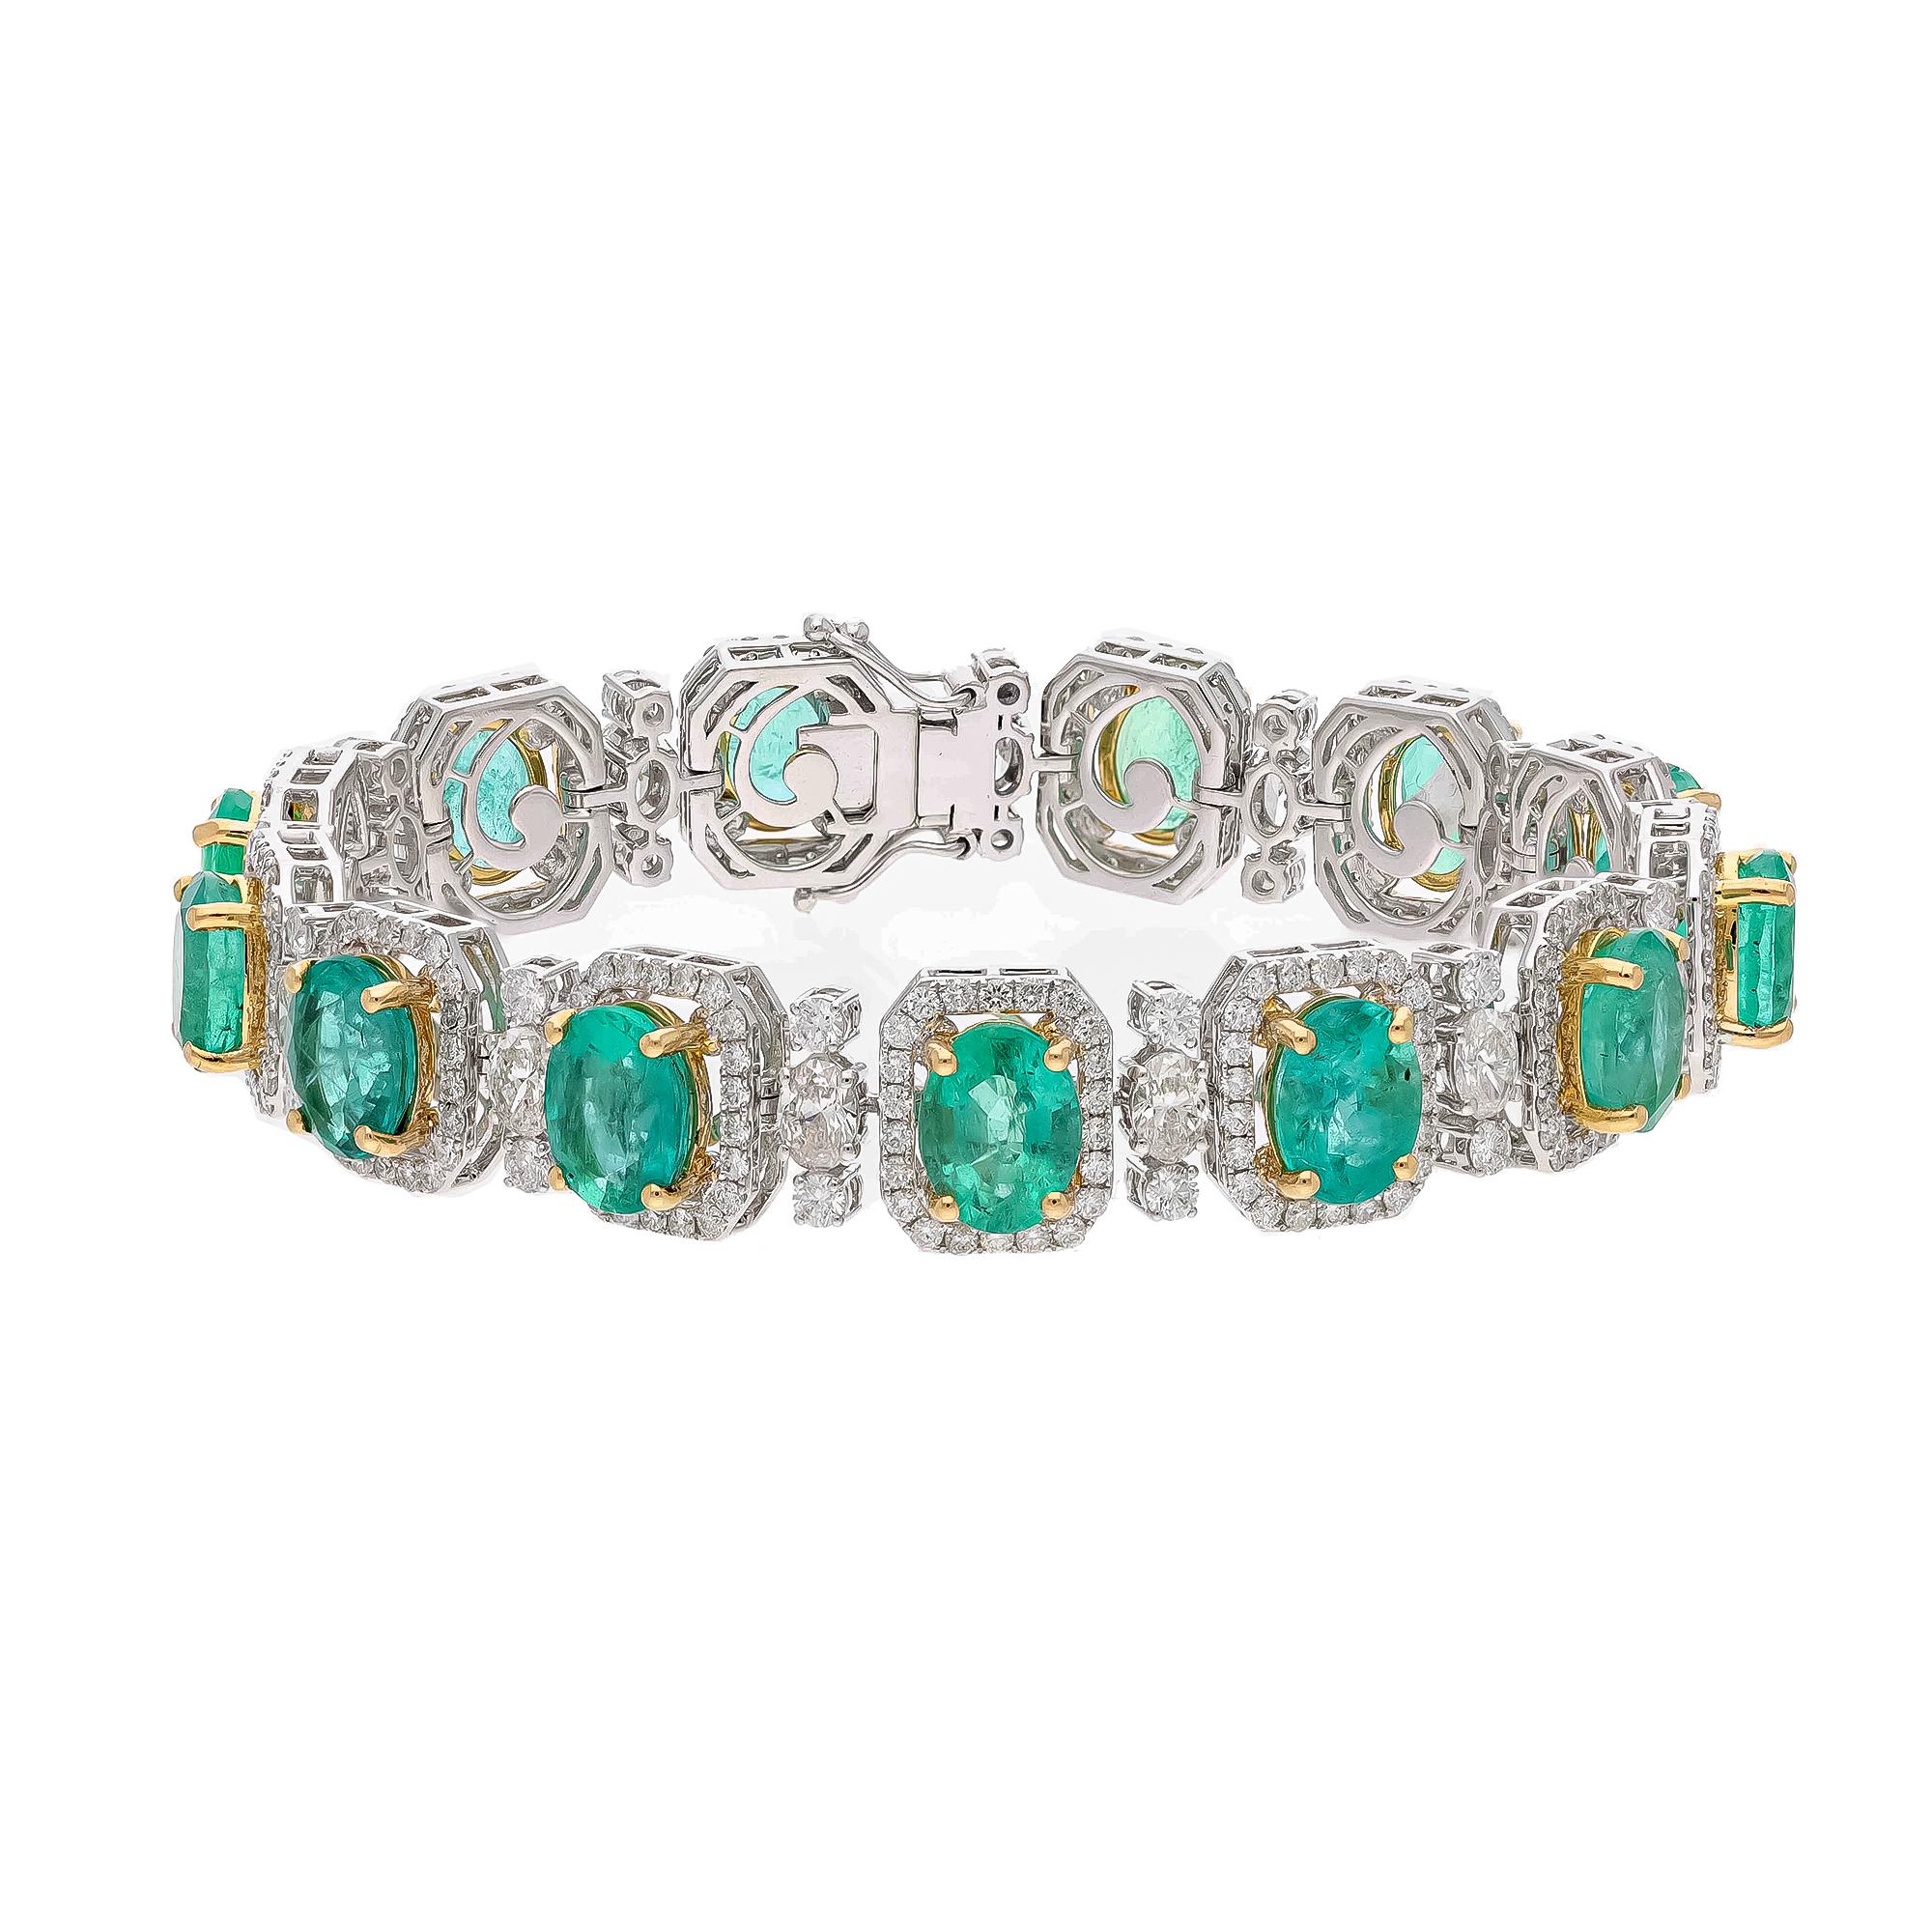 This is a stunning natural Zambian Emerald bracelet which has Emerald of very high quality and diamonds of very good quality . it has vsi clarity and G colour.

Emerald : 24.66 cts
diamonds : 7.90 cts
gold :33.23 gms

Its very hard to capture the